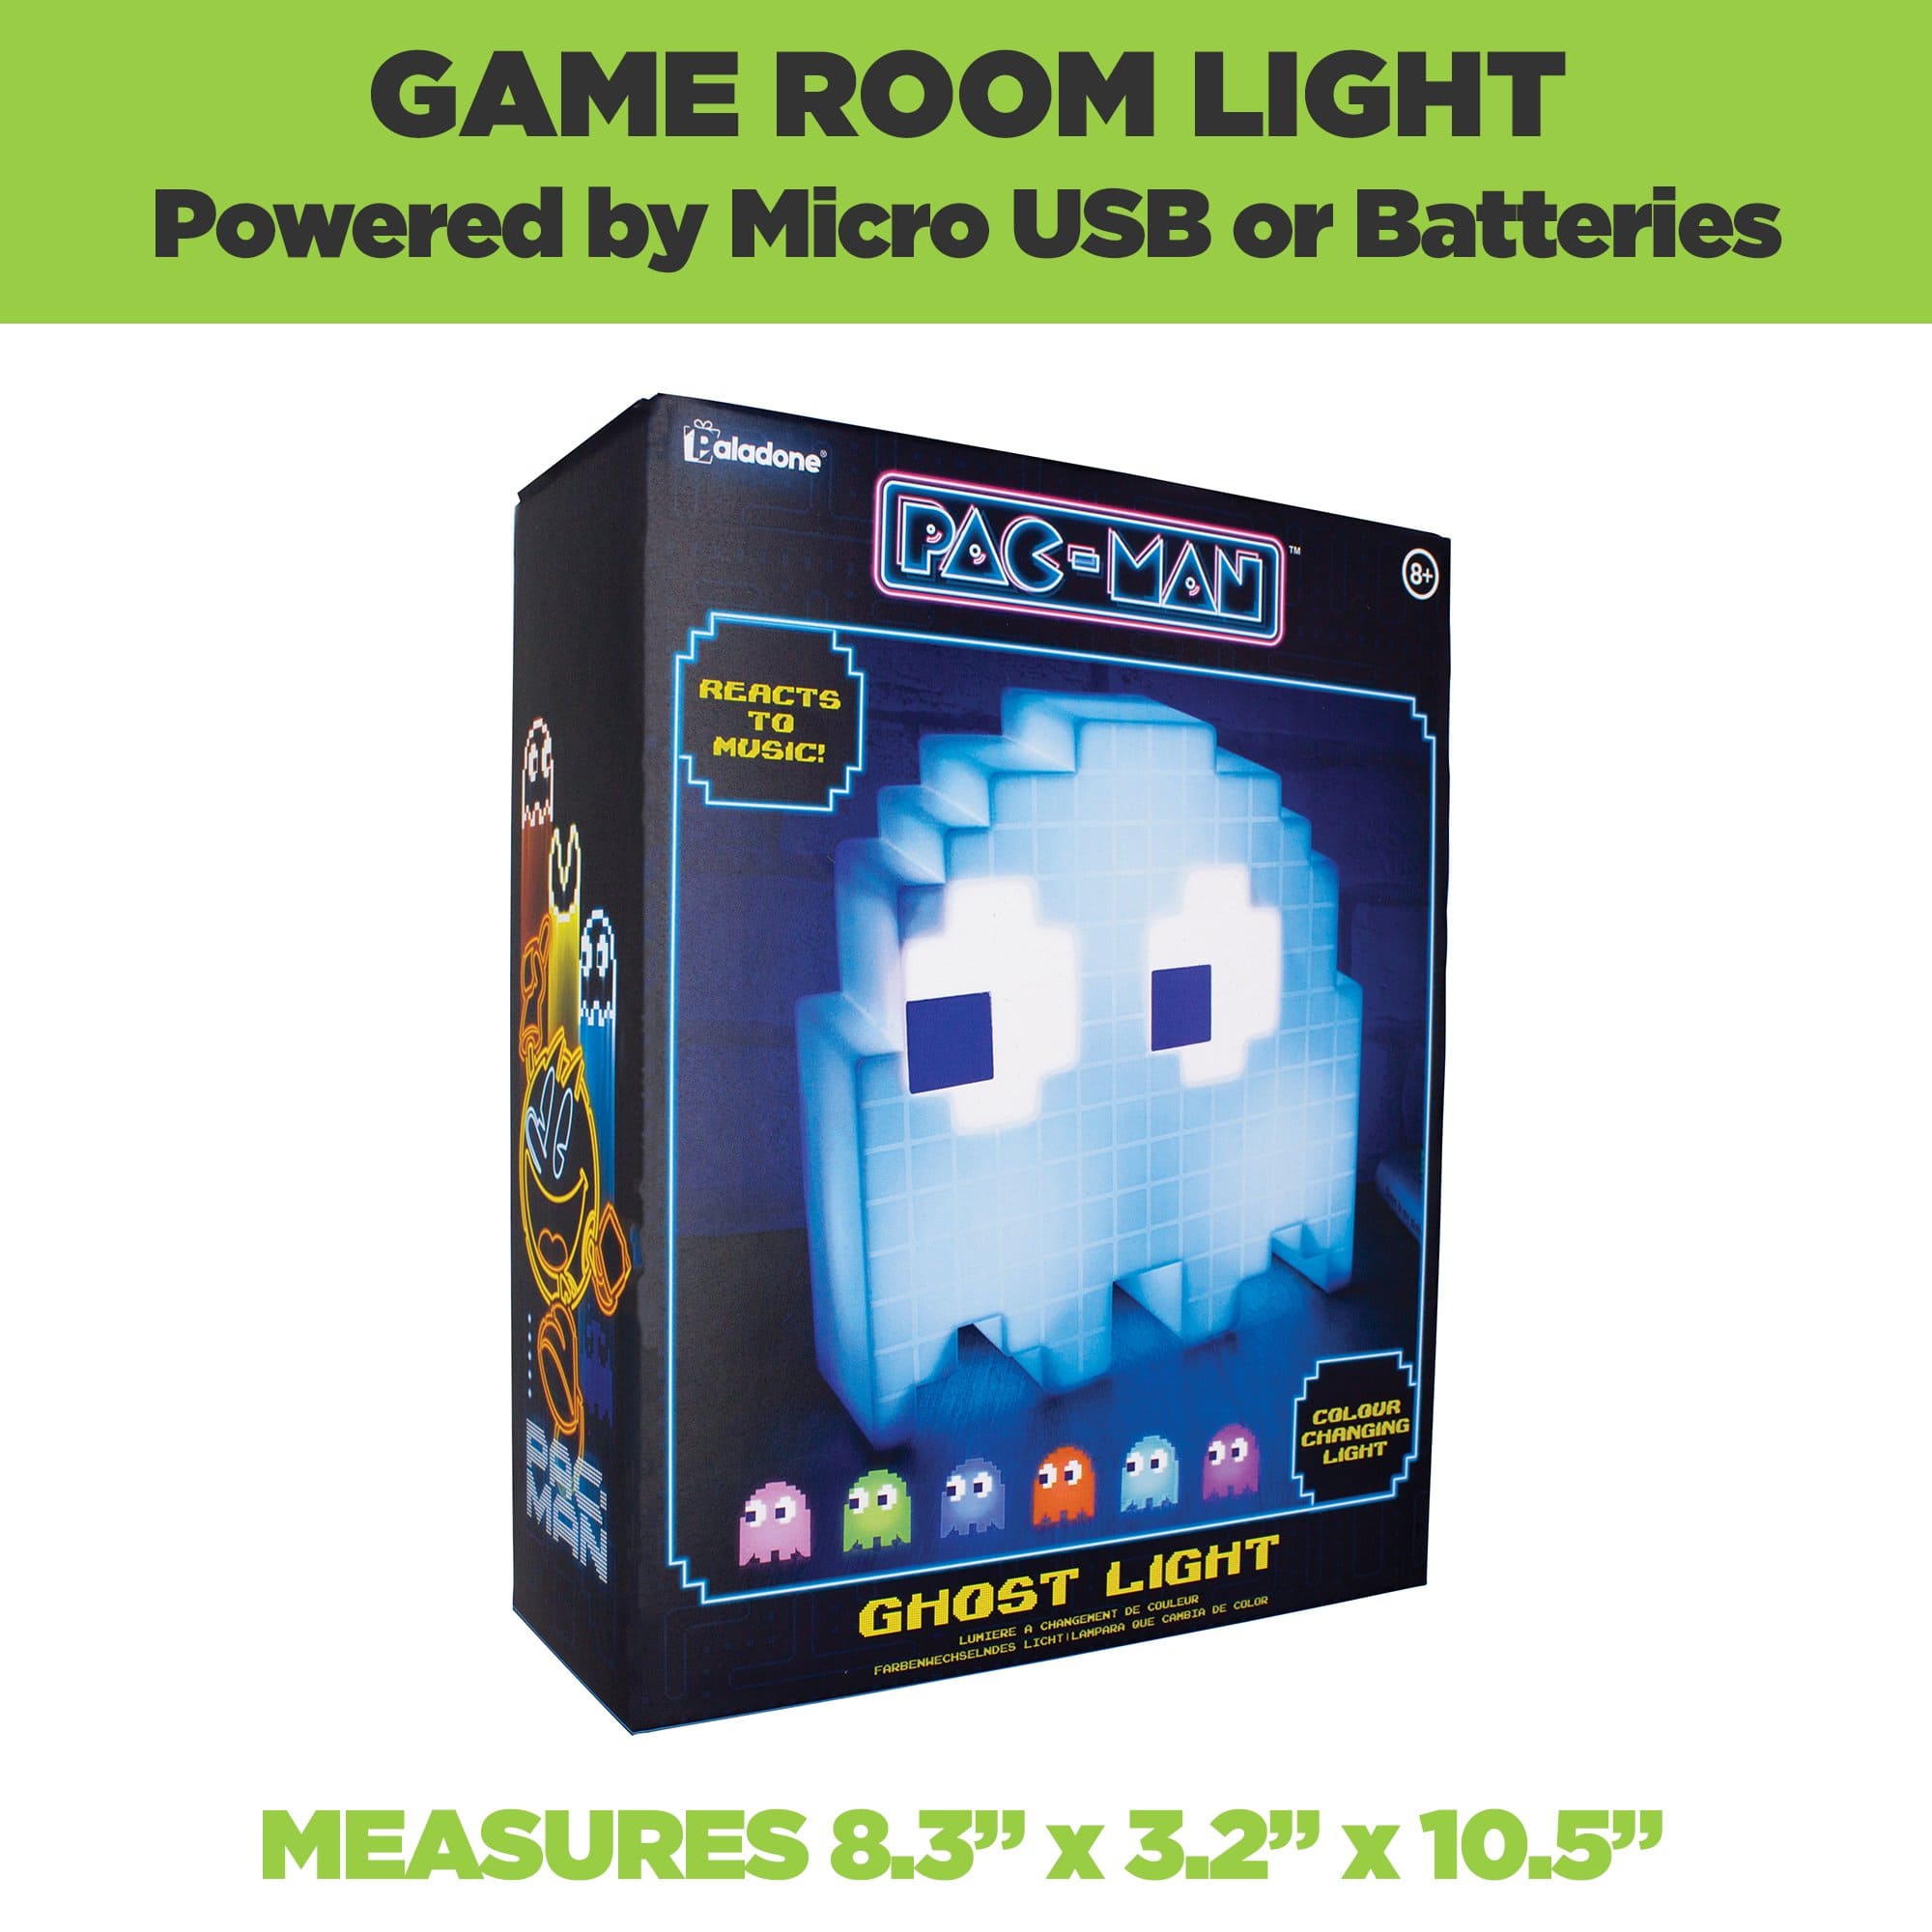 Pac-man ghost lamp comes in official Pac-man packaging. Micro USB or battery powered.